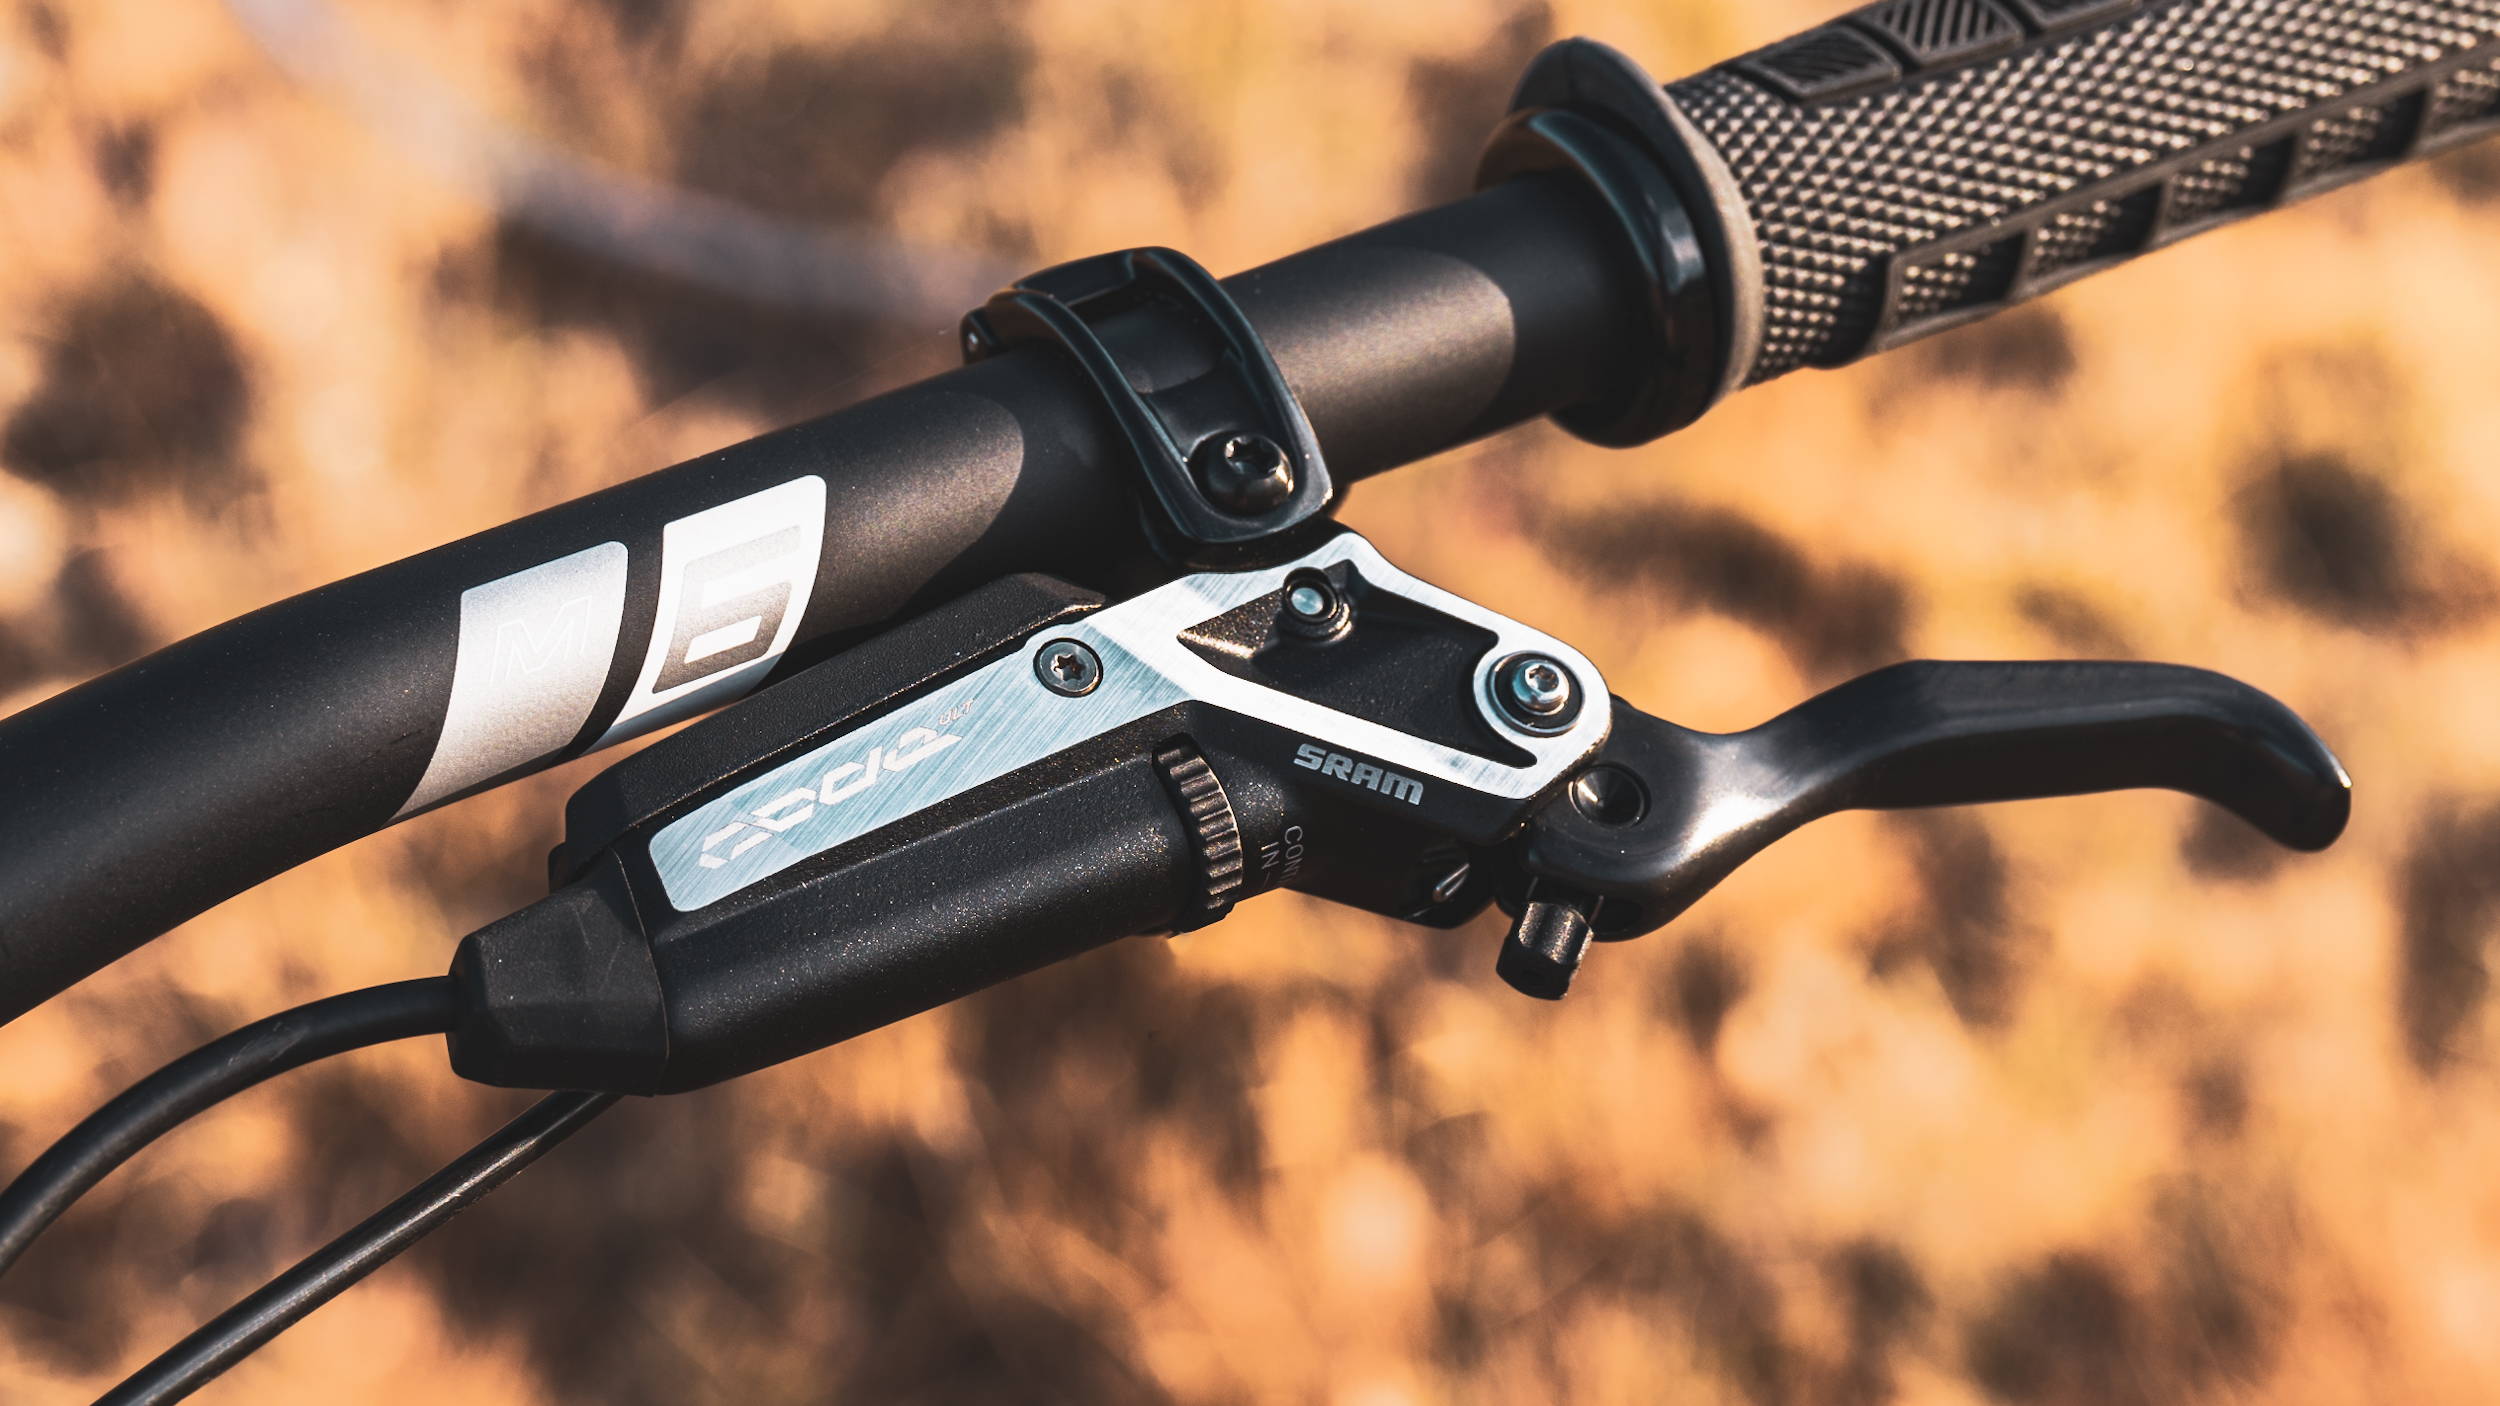 SRAM Code Stealth Ultimate Lever mounted on Enve handlebars with ODI Grips